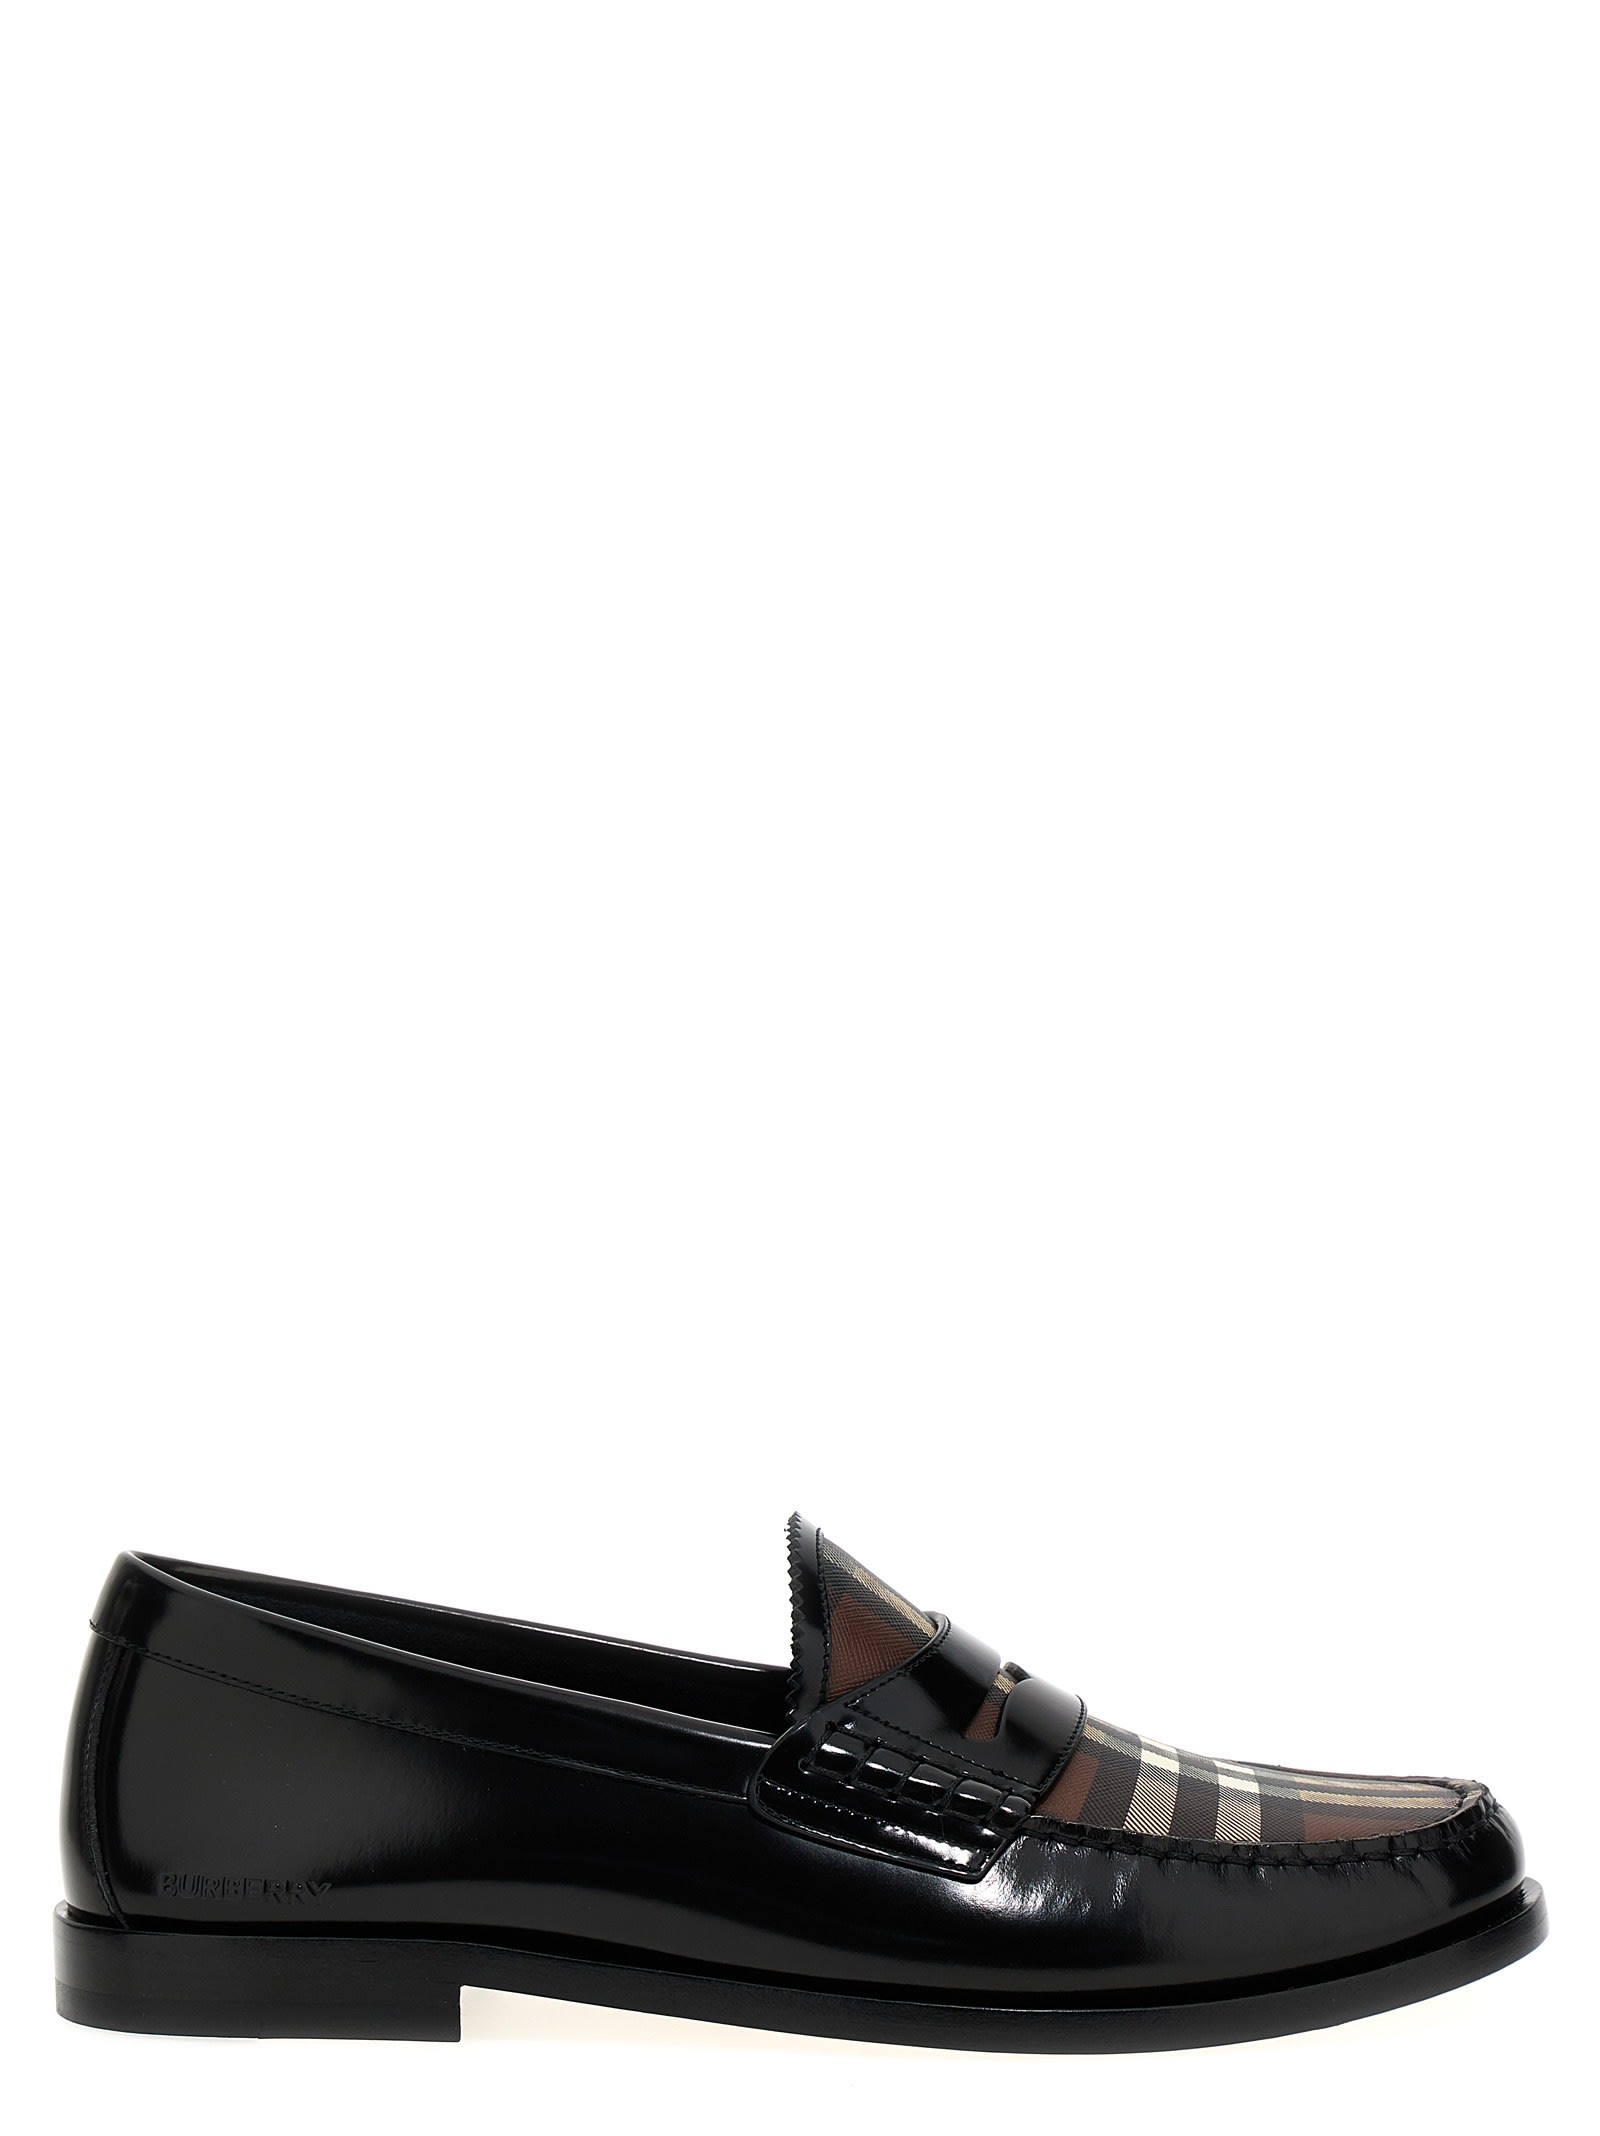 BURBERRY SHANE LOAFERS